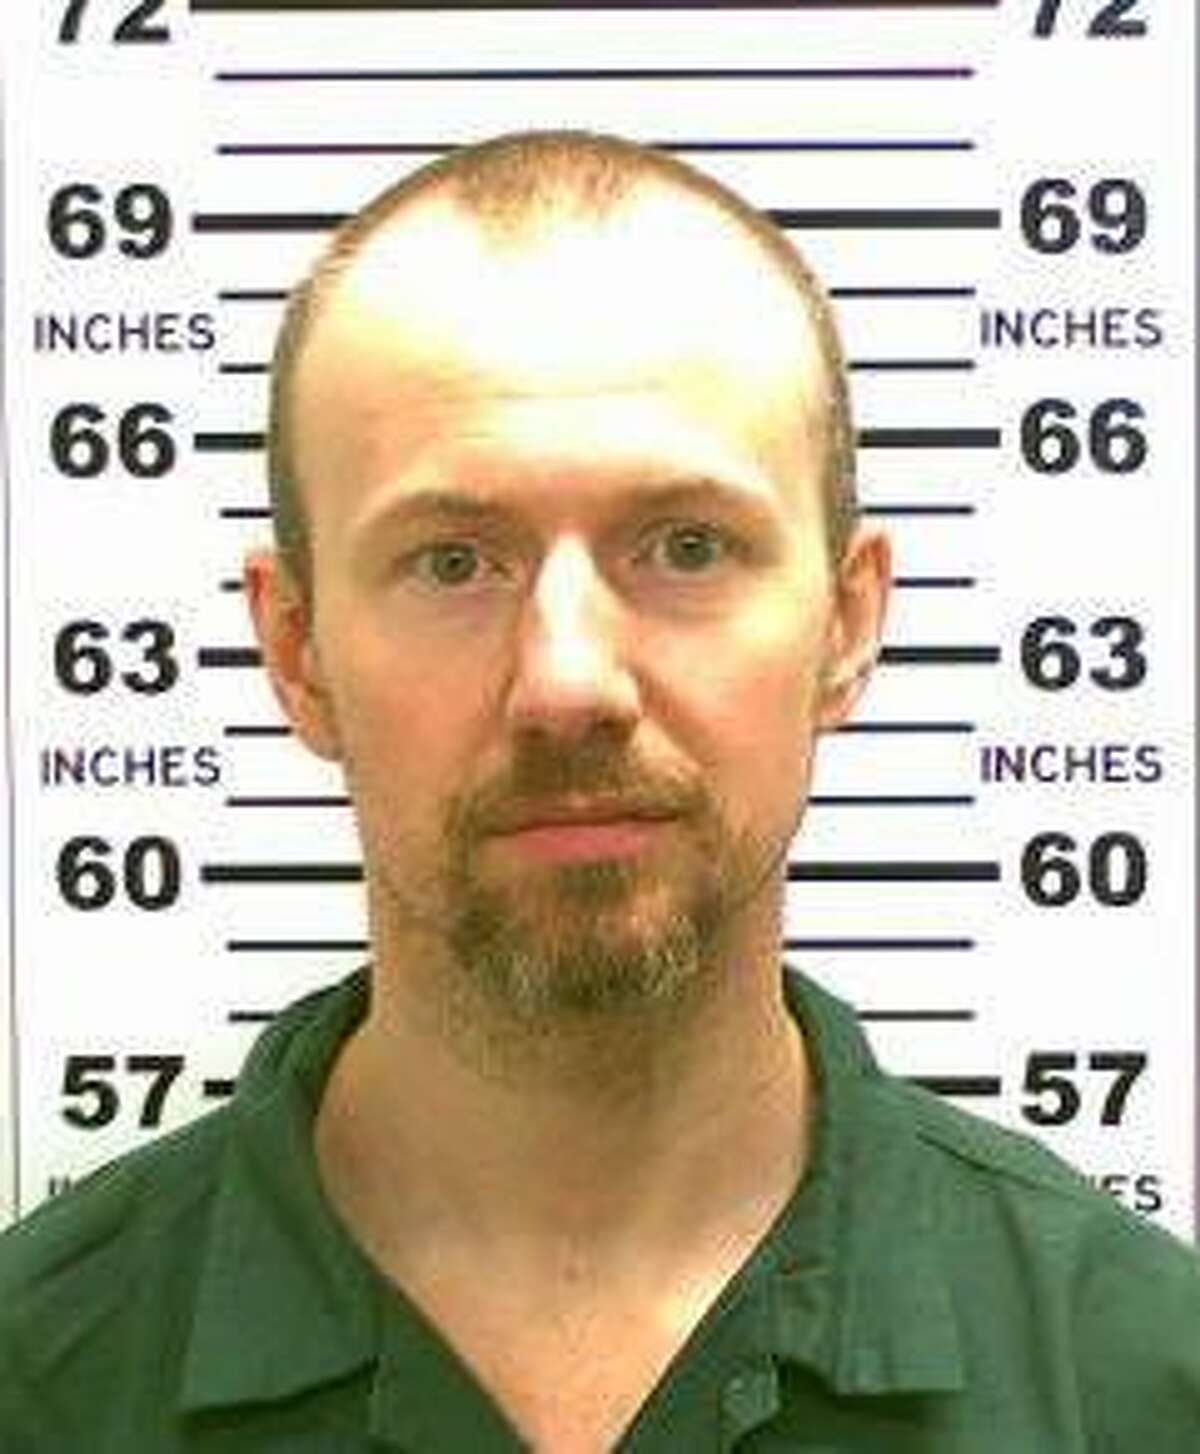 This undated photo released by the New York State Police shows David Sweat. Authorities say 48-year-old Richard Matt and 34-year-old David Sweat escaped from the Clinton Correctional Facility in Dannemora. (New York State Police via AP)